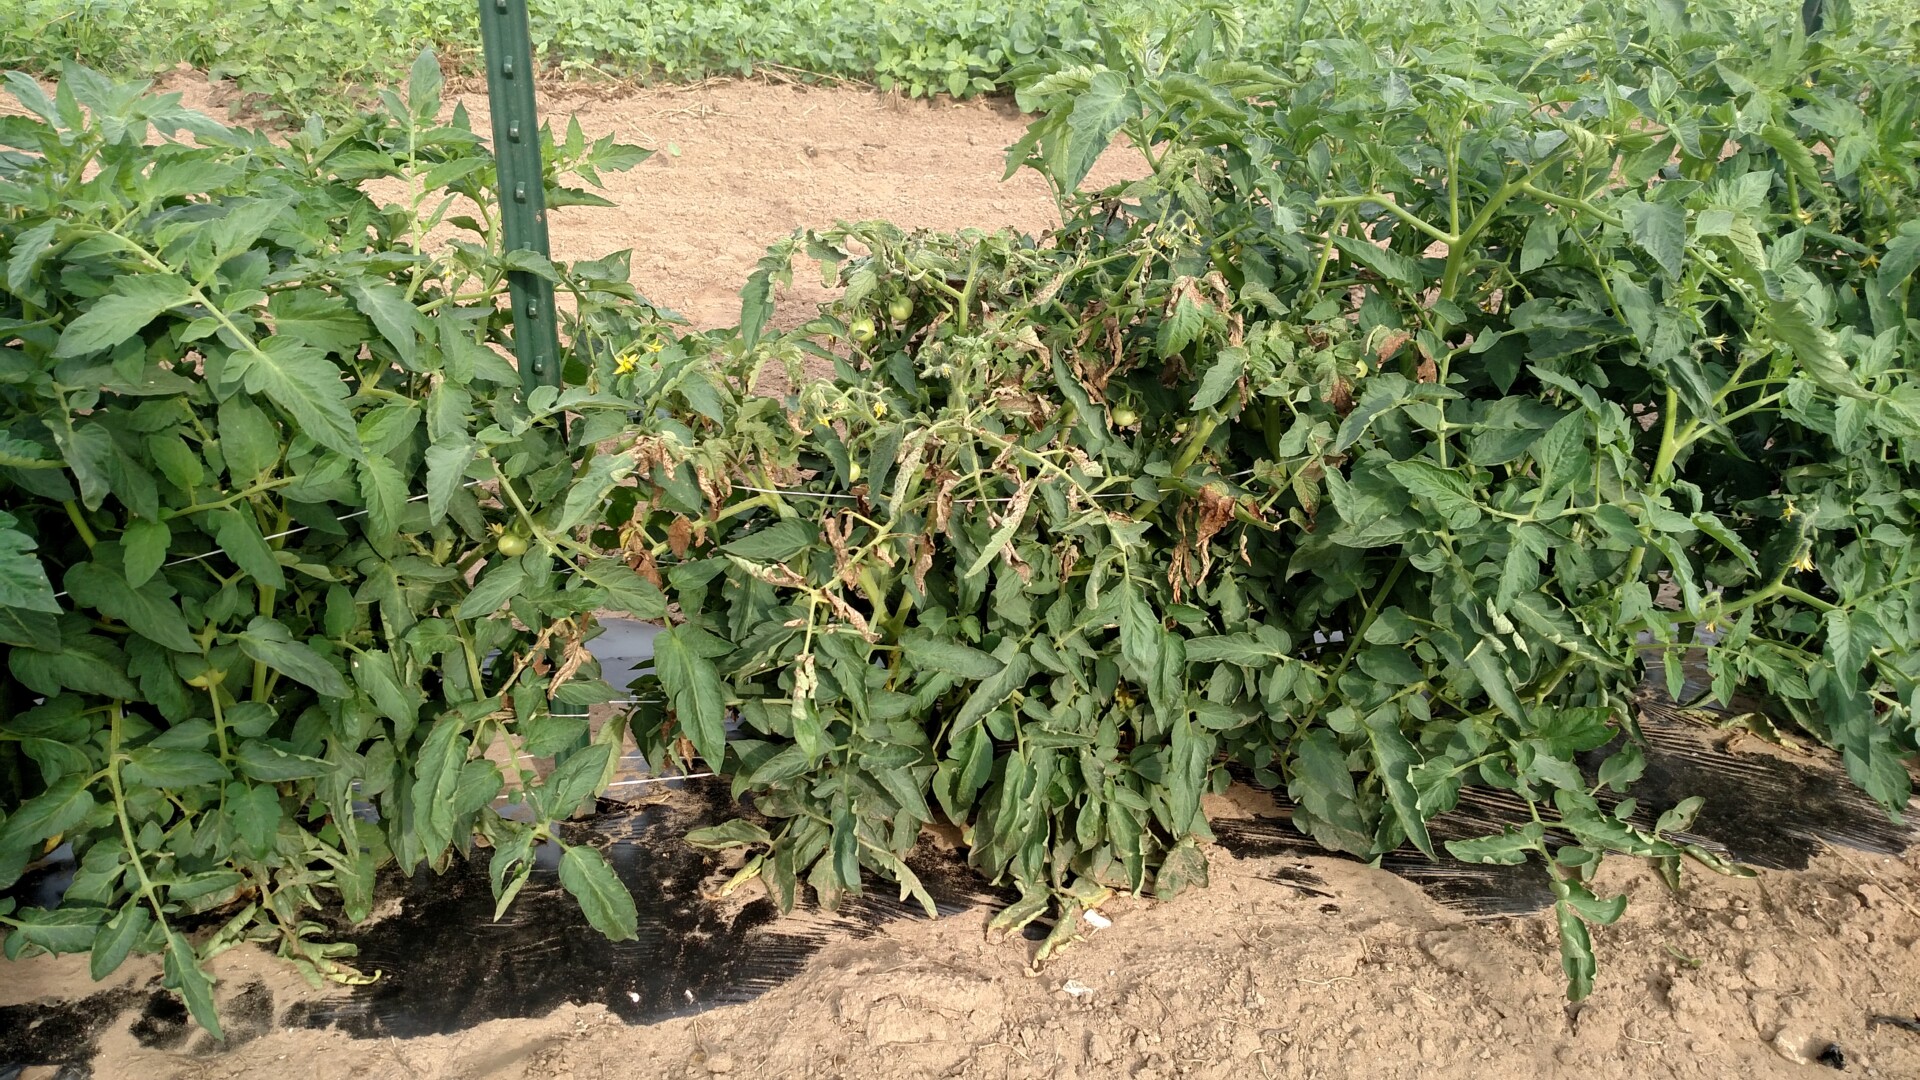 Figure 6. Center plant is stunted and wilted due to tomato spotted wilt virus.